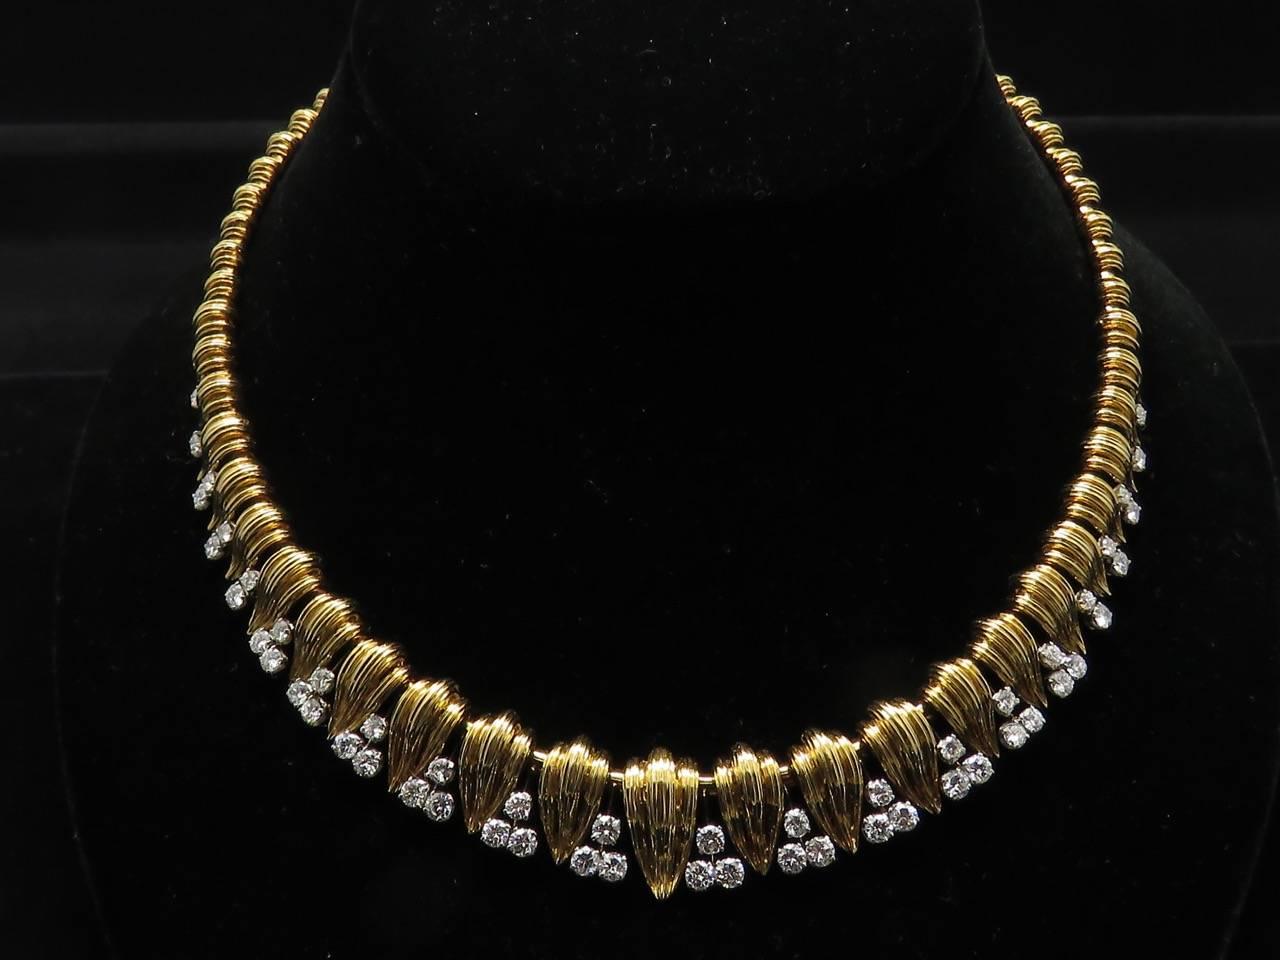 18 Karat yellow gold platinum custom made diamonds approximately 6 carats necklace.
Signed Mauboussin Paris and Numbered.
Weight: 87.4 grams
Length: 15.75 inches (  40 cm)  Maximun Width: 3/8 inch
Made in France.
Circa 1960.